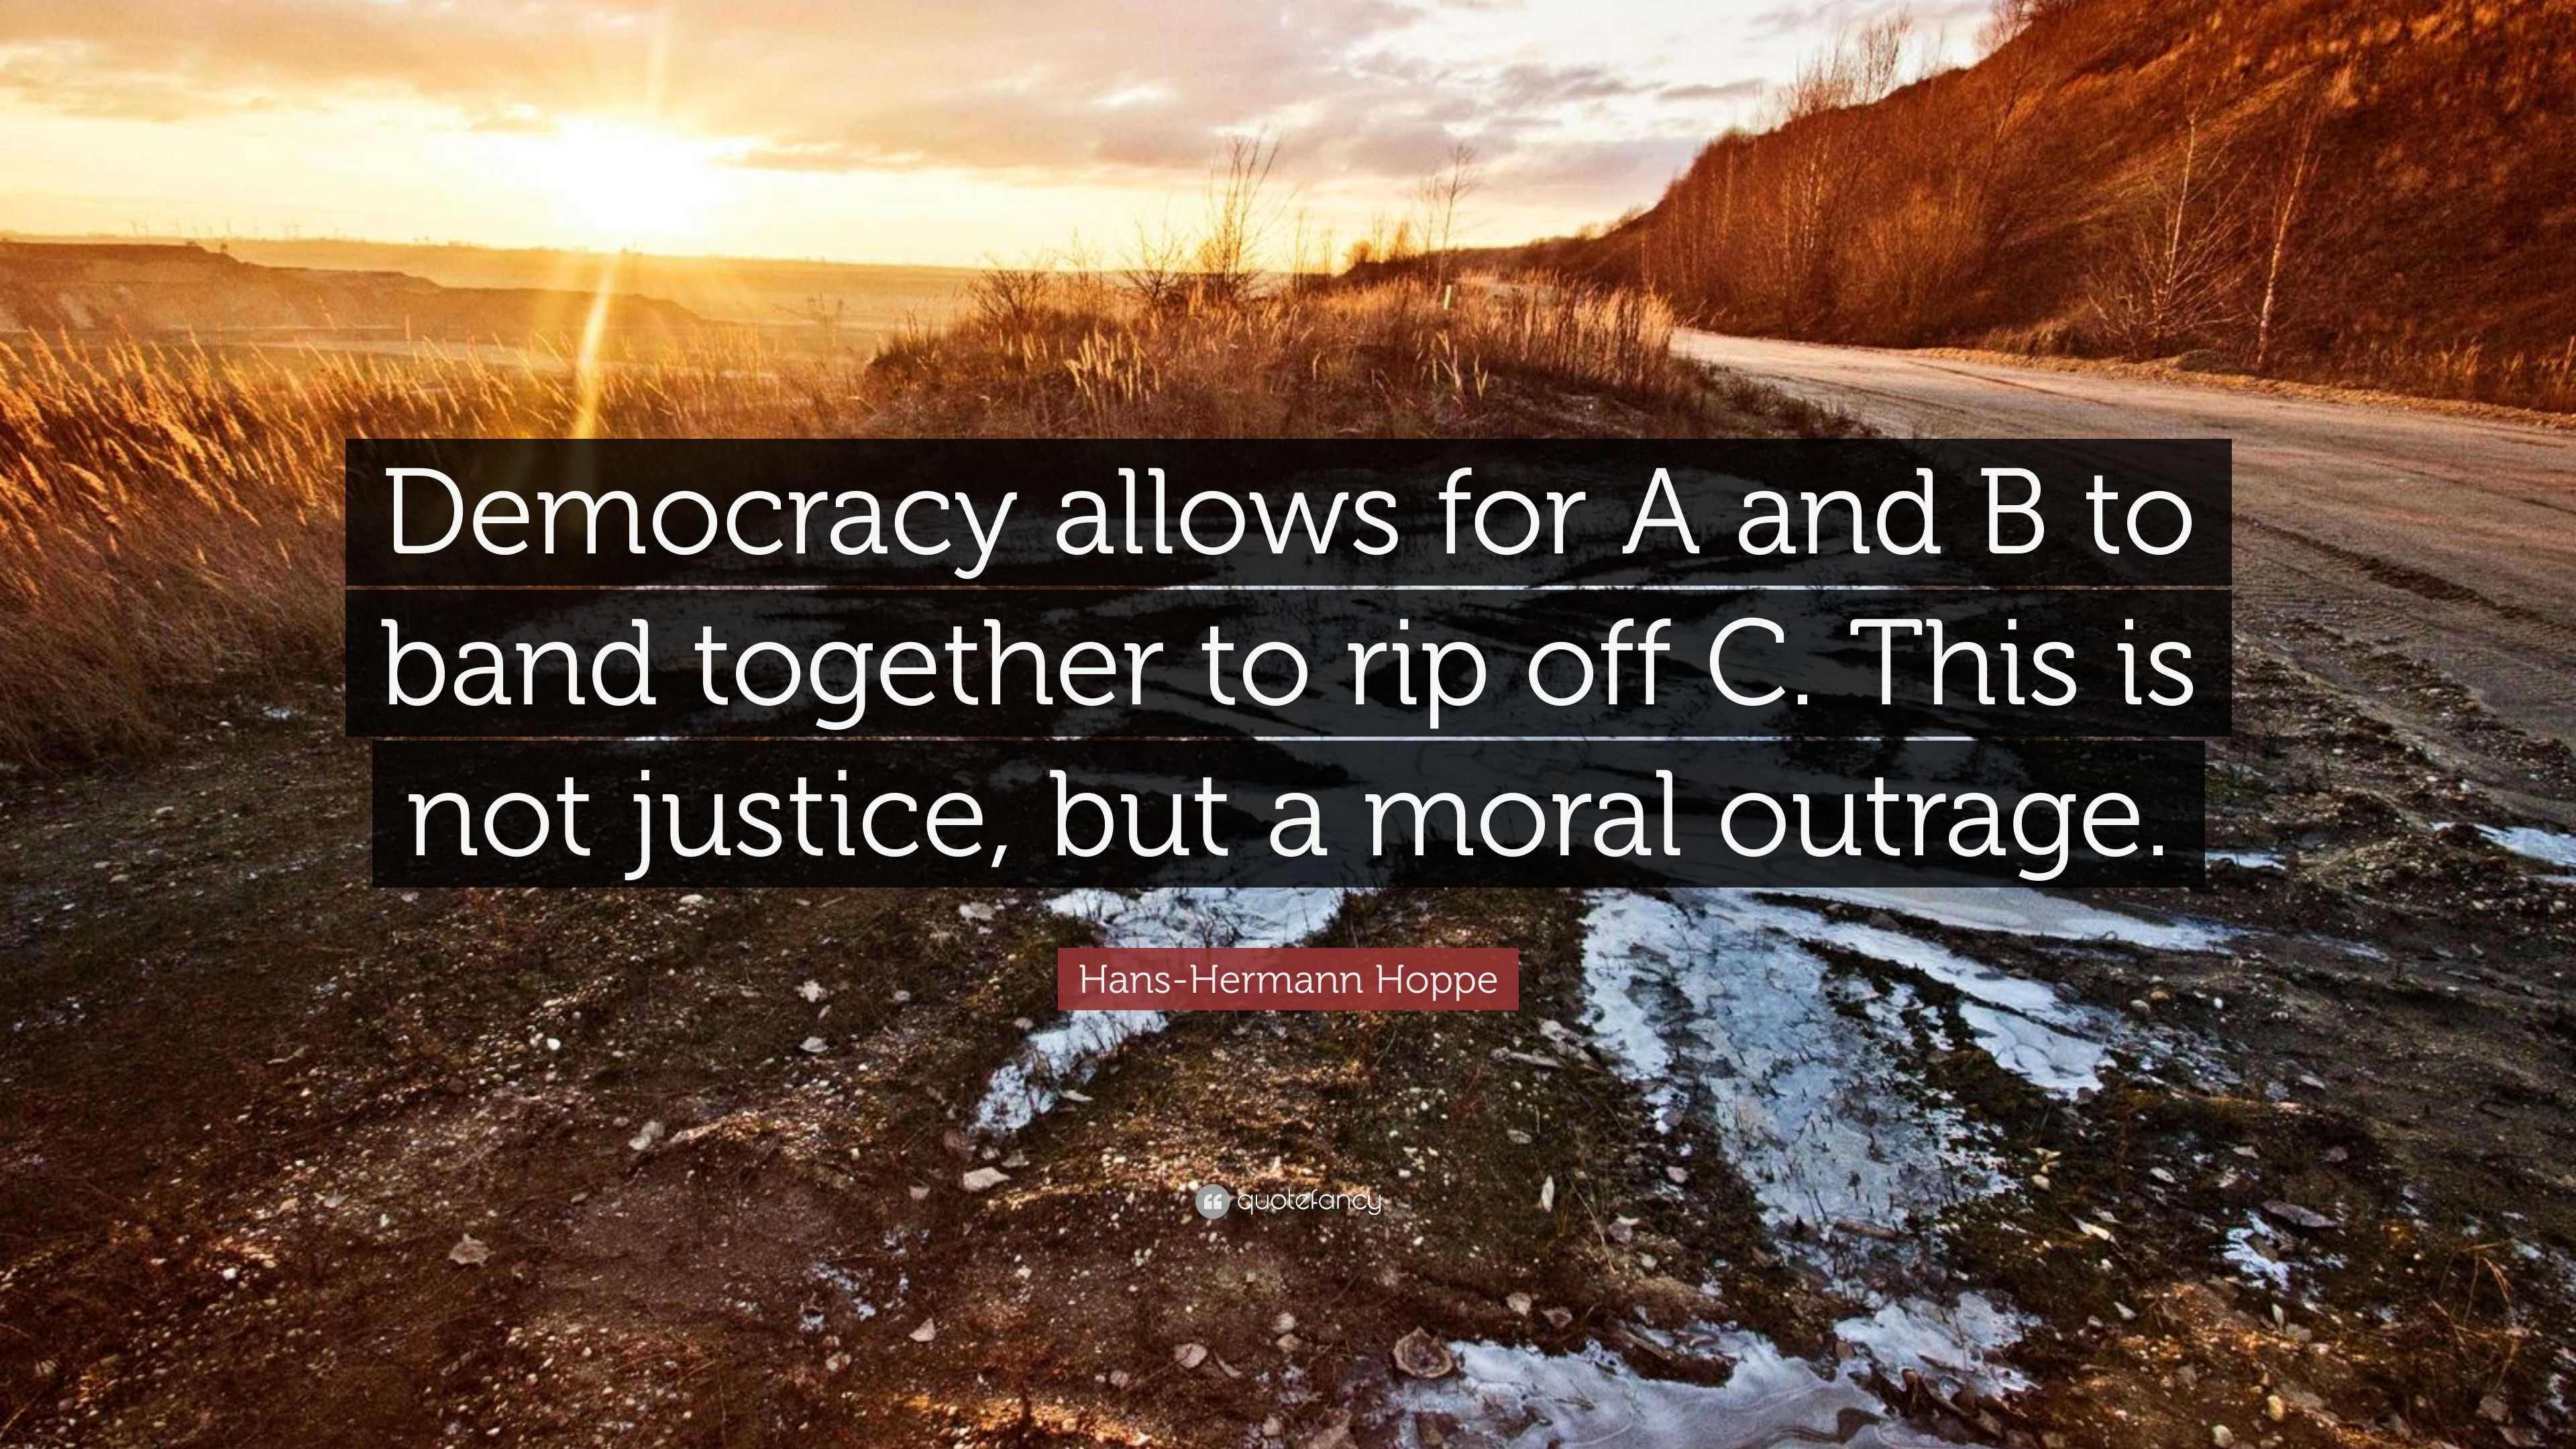 Hans-Hermann Hoppe Quote: “Democracy allows for A and B to band